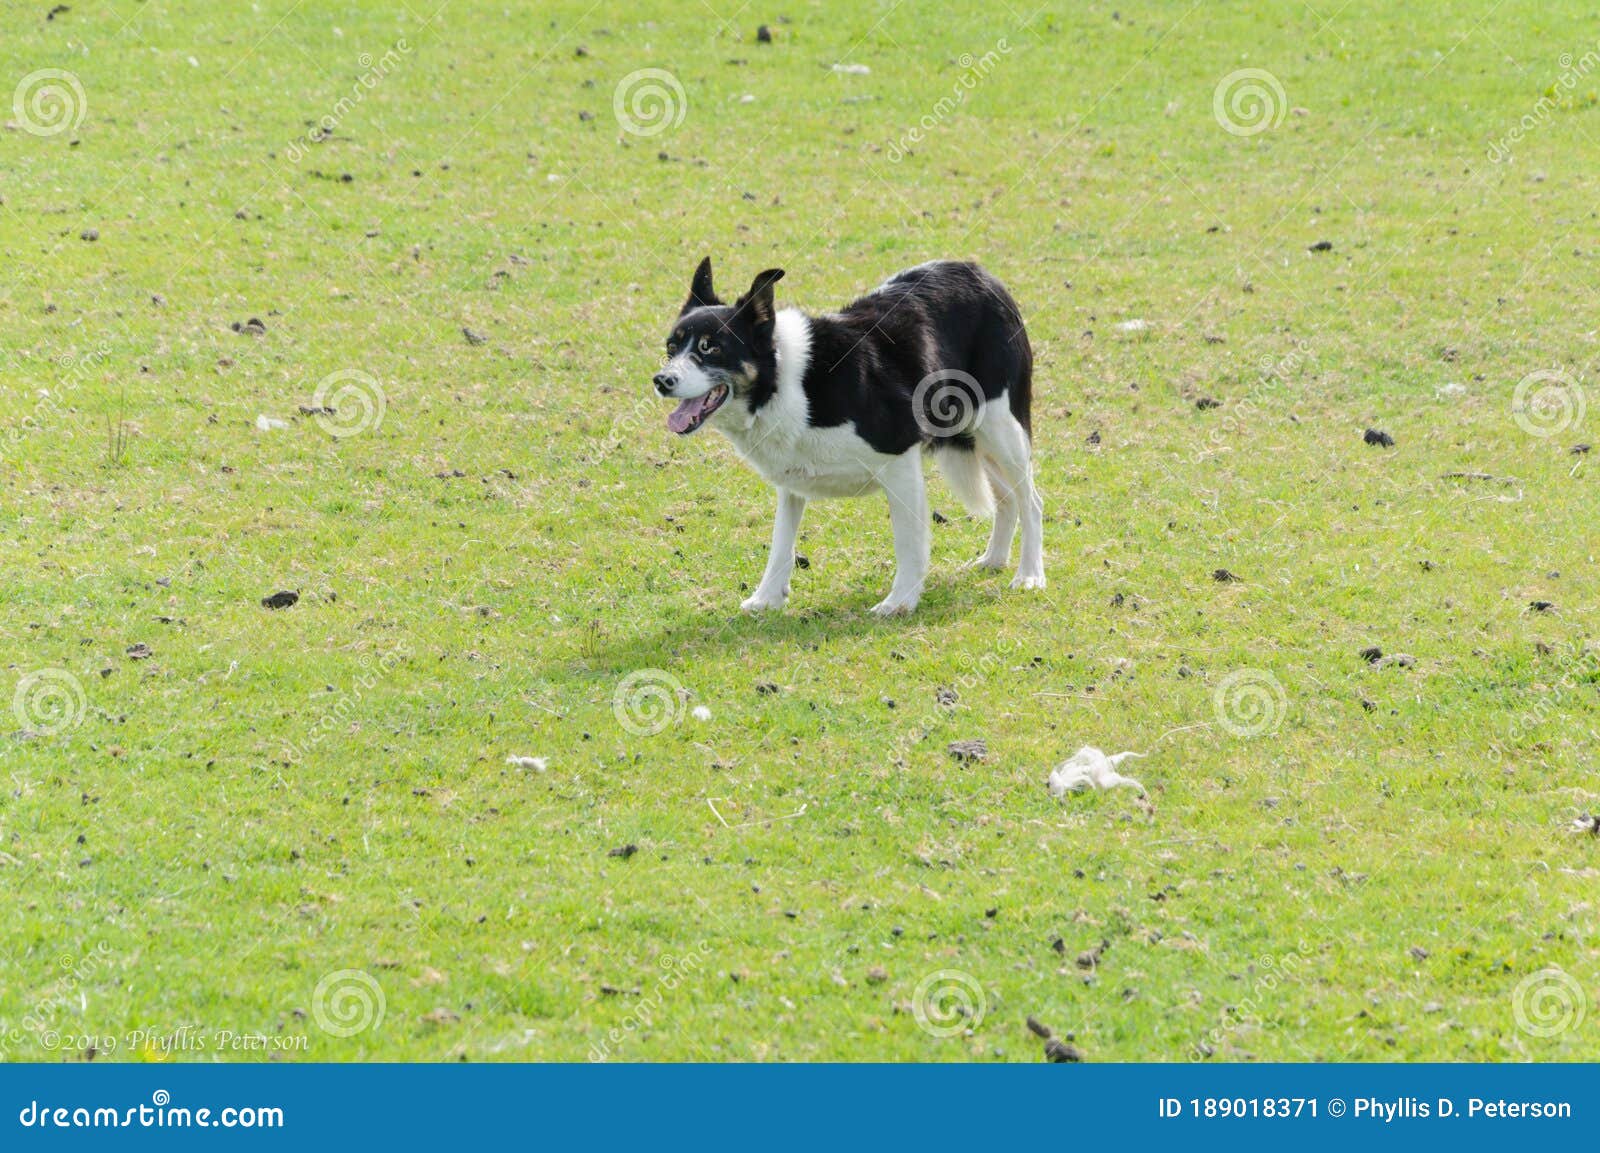 black and white sheep dogs